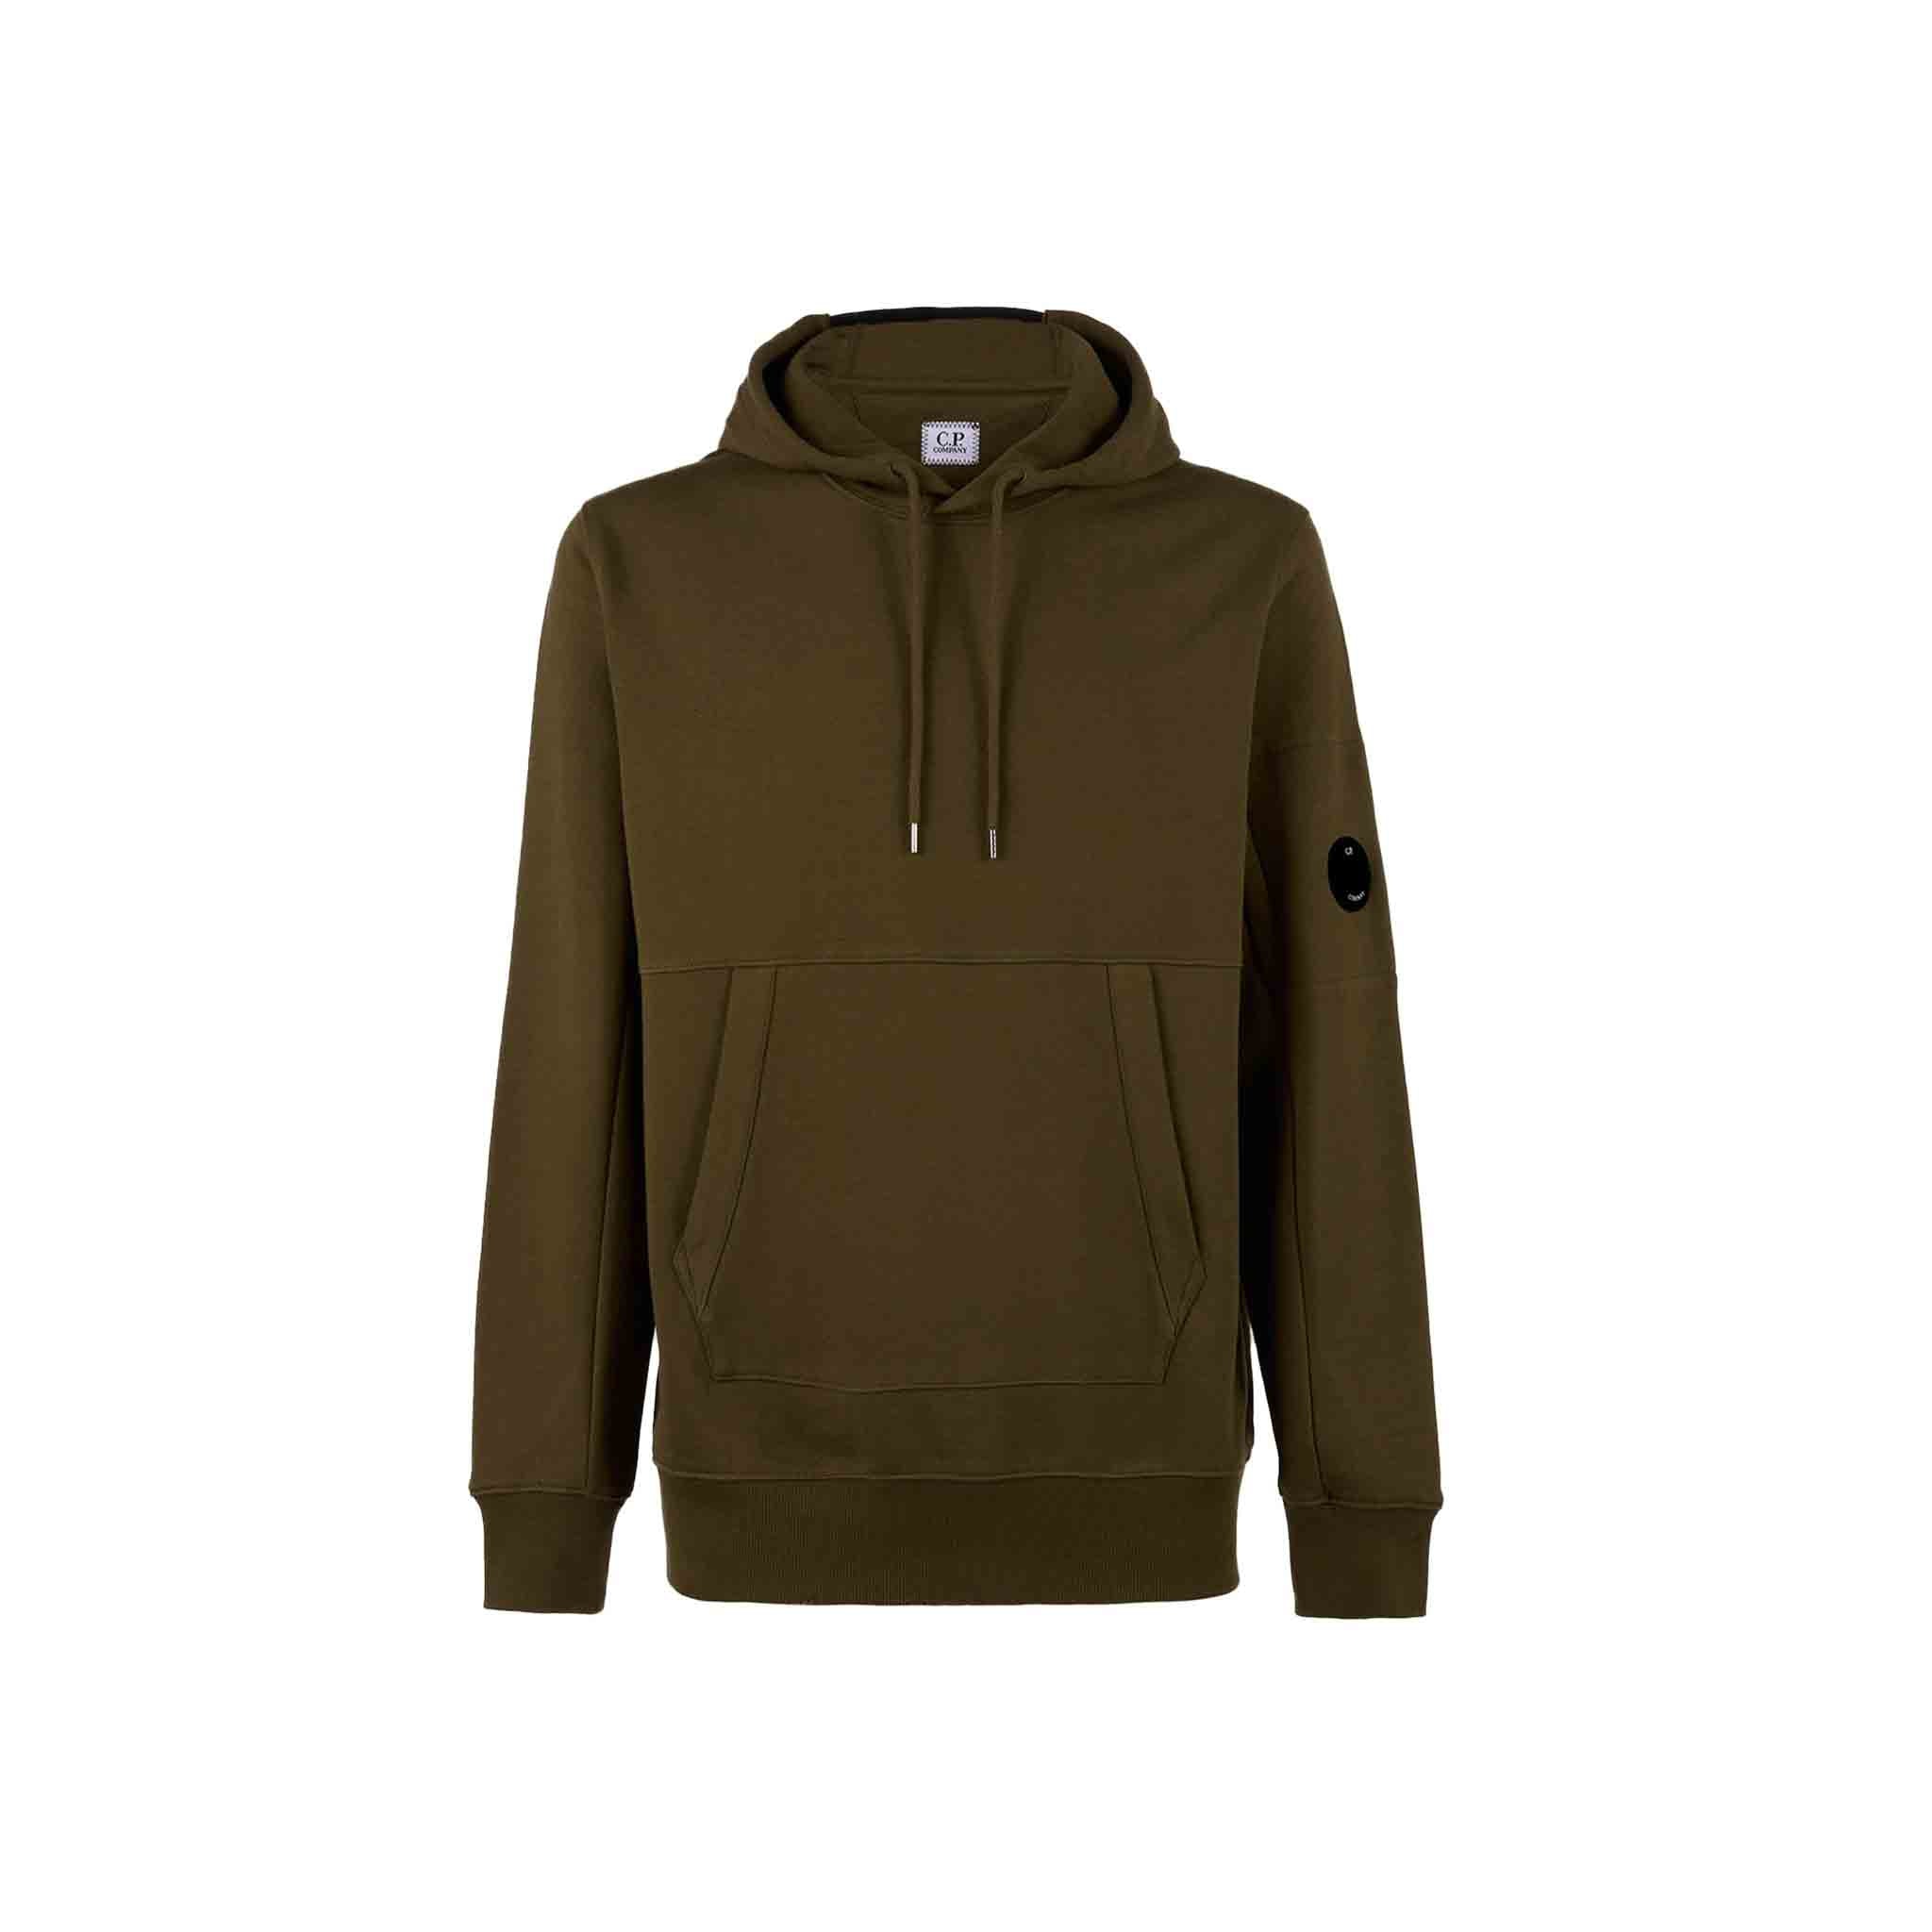 A pullover hoodie featuring a front kangaroo pocket, an adjustable drawstring hood with an engineered logo, and a secure sleeve compartment fitted with the C.P. Company Lens detail. Crafted in diagonal raised fleece, a midweight loopback cotton option that combines absolute comfort with a substantial and hard-wearing feel.